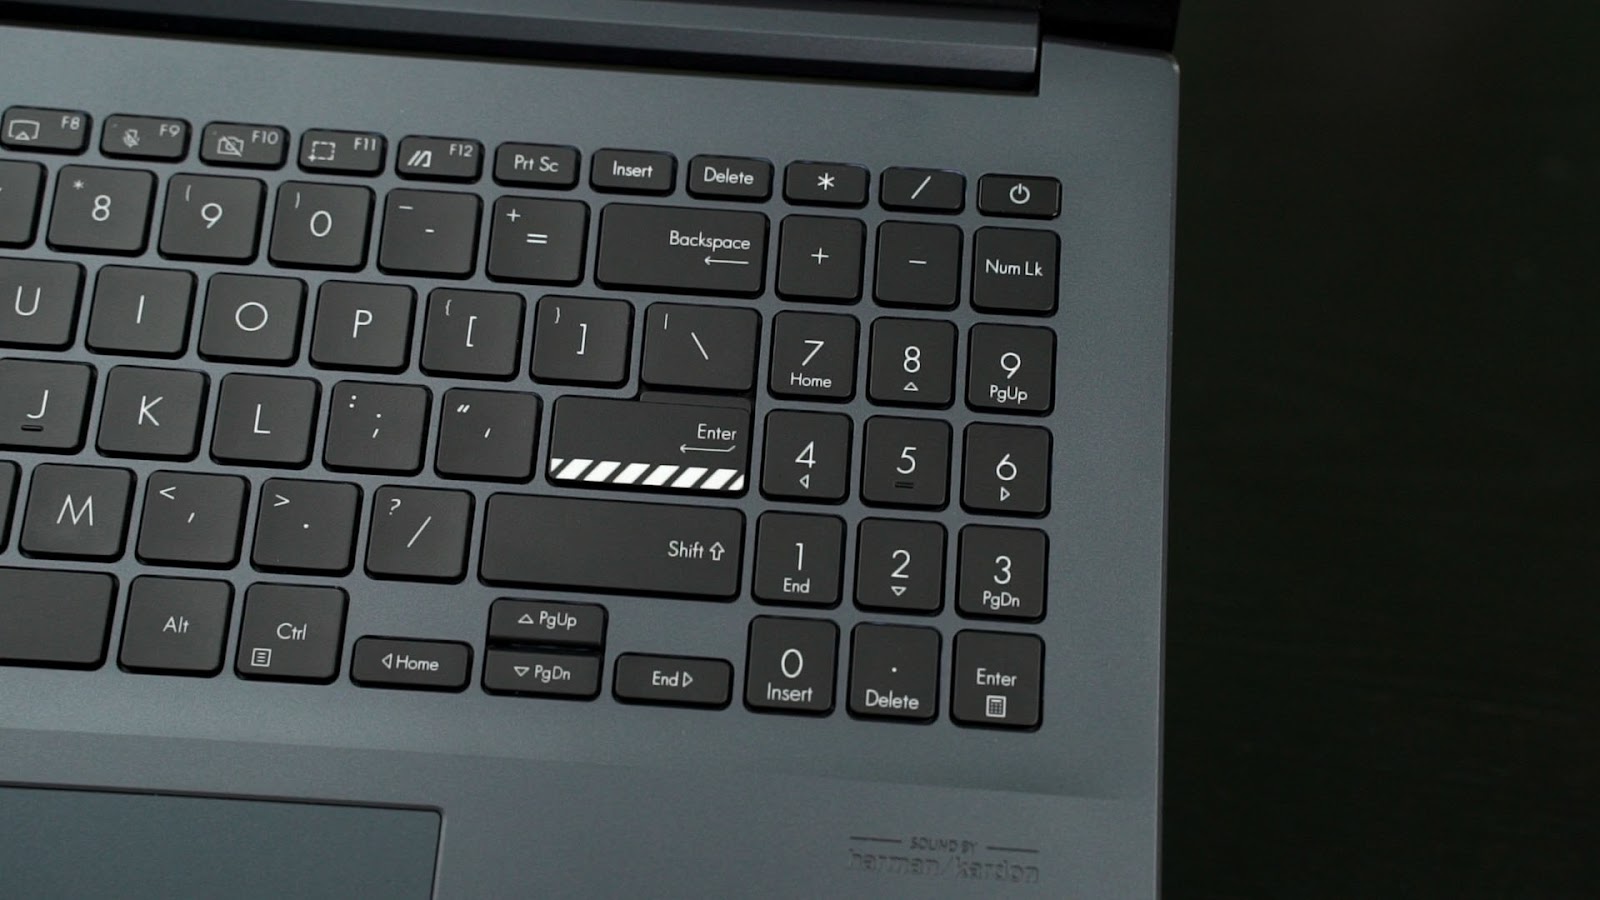 This image shows the keyboard of the ASUS VivoBook 15 2022.